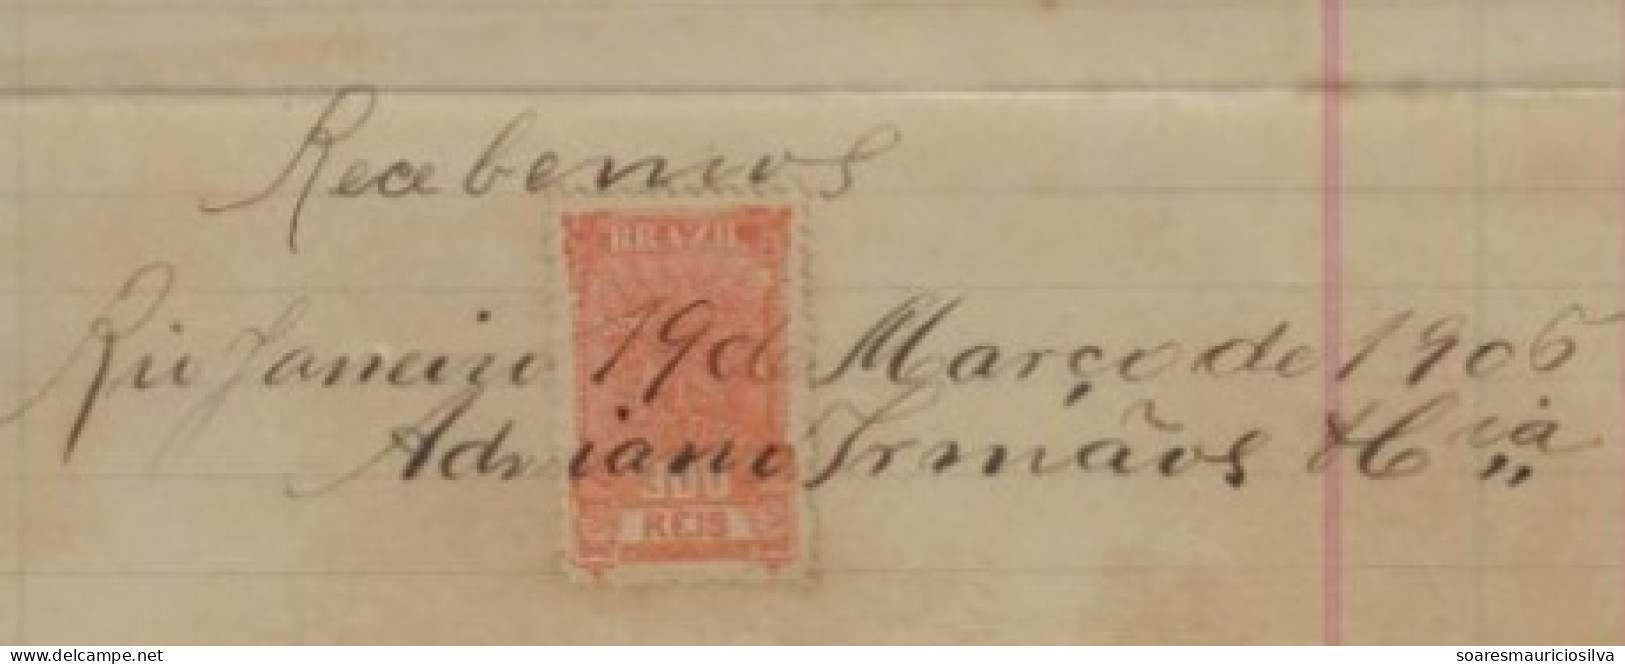 Brazil 1906 Invoice Factory Brushes Dustpans Broomsby Adriano Brothers &Co Rio De Janeiro Federal Treasury Tax Stamp 300 - Storia Postale